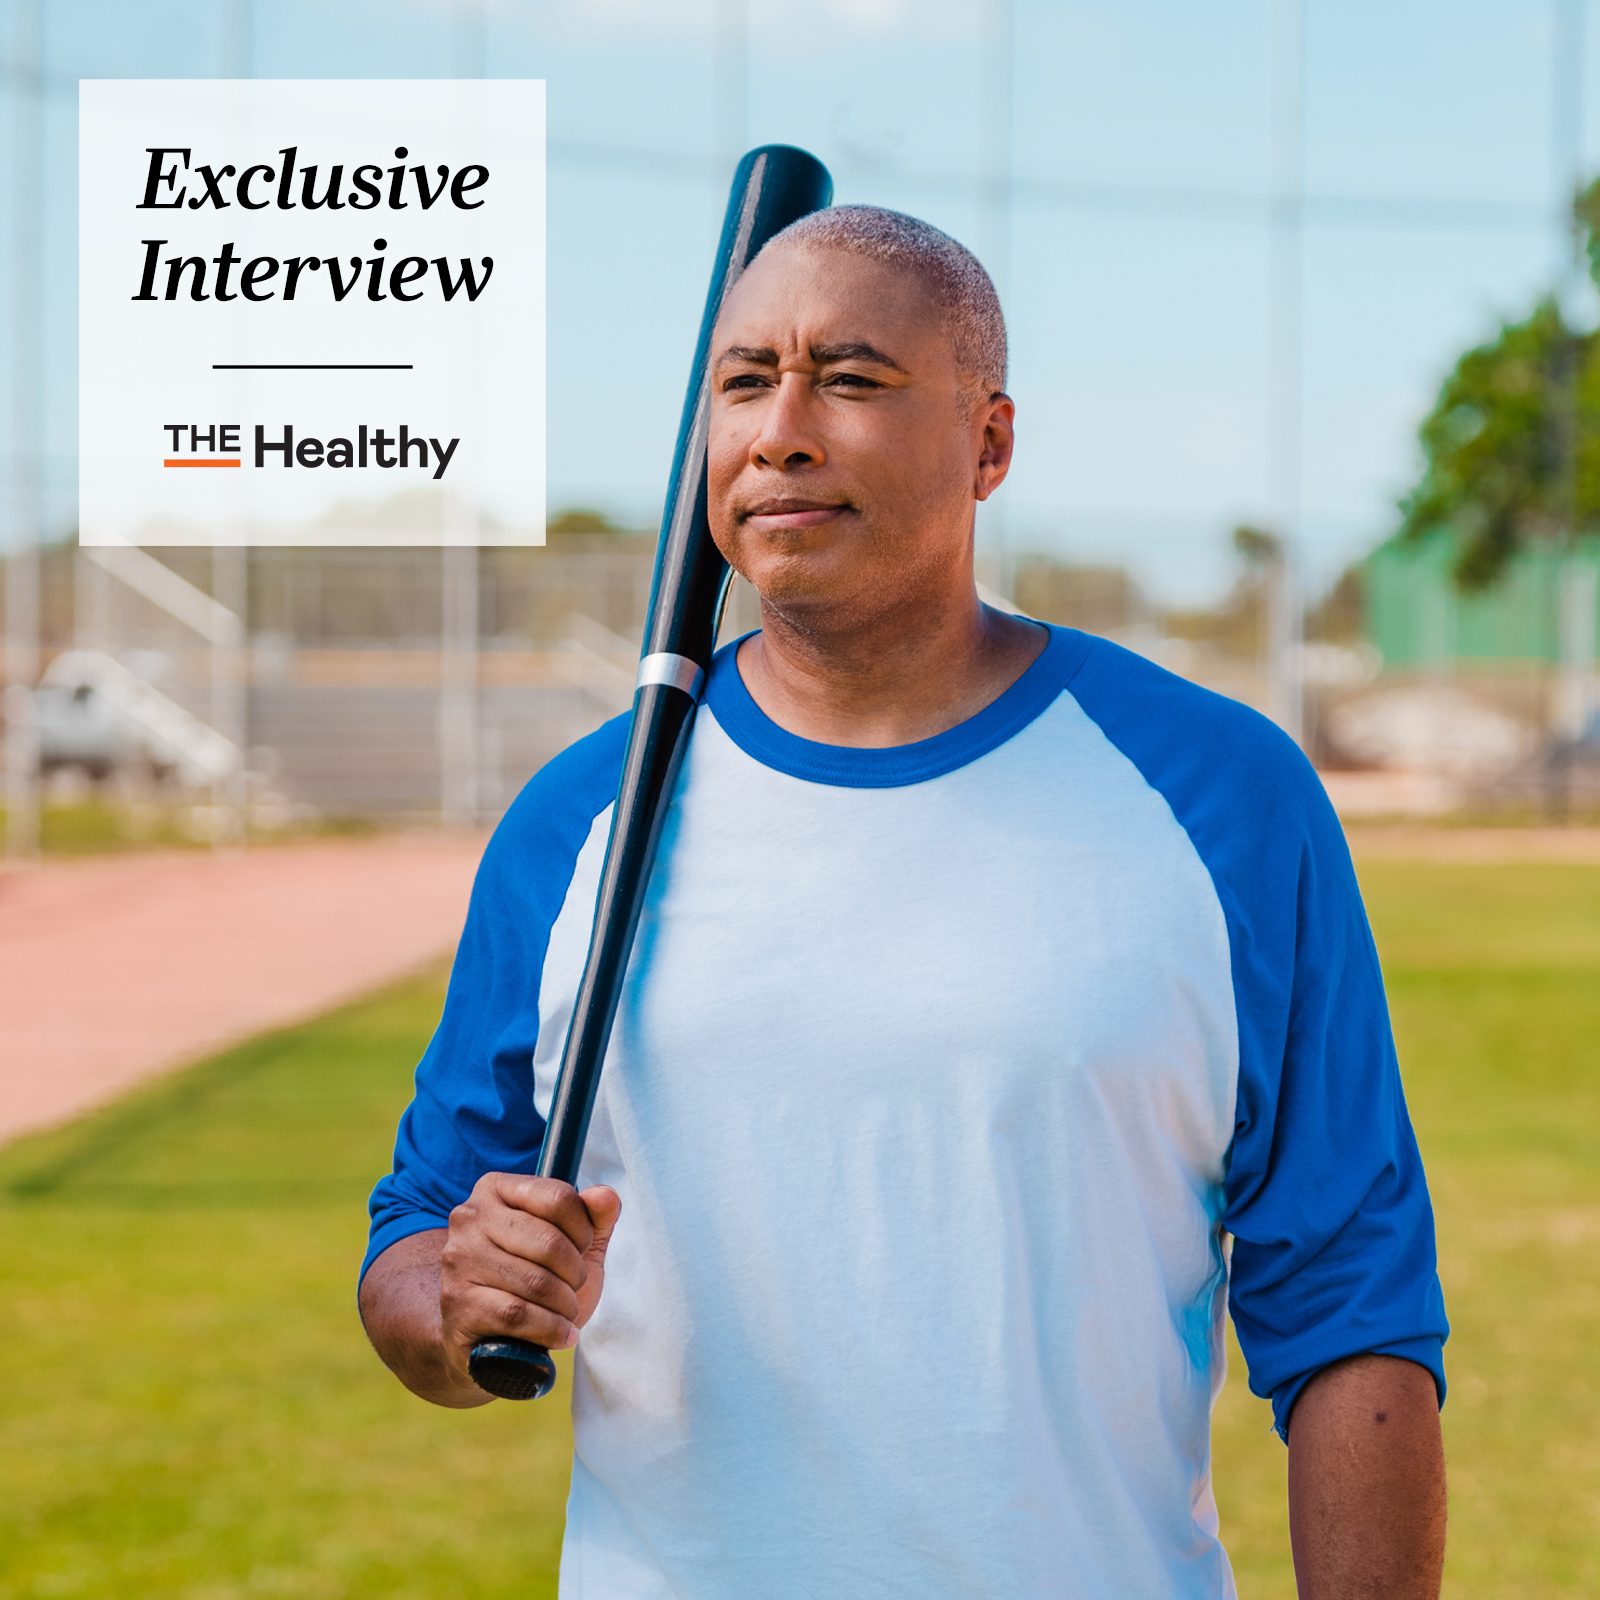 'Swing Hard in Case You Hit It': NY Yankees Legend Bernie Williams Shares Lessons from His Family’s Liver Disease Fight